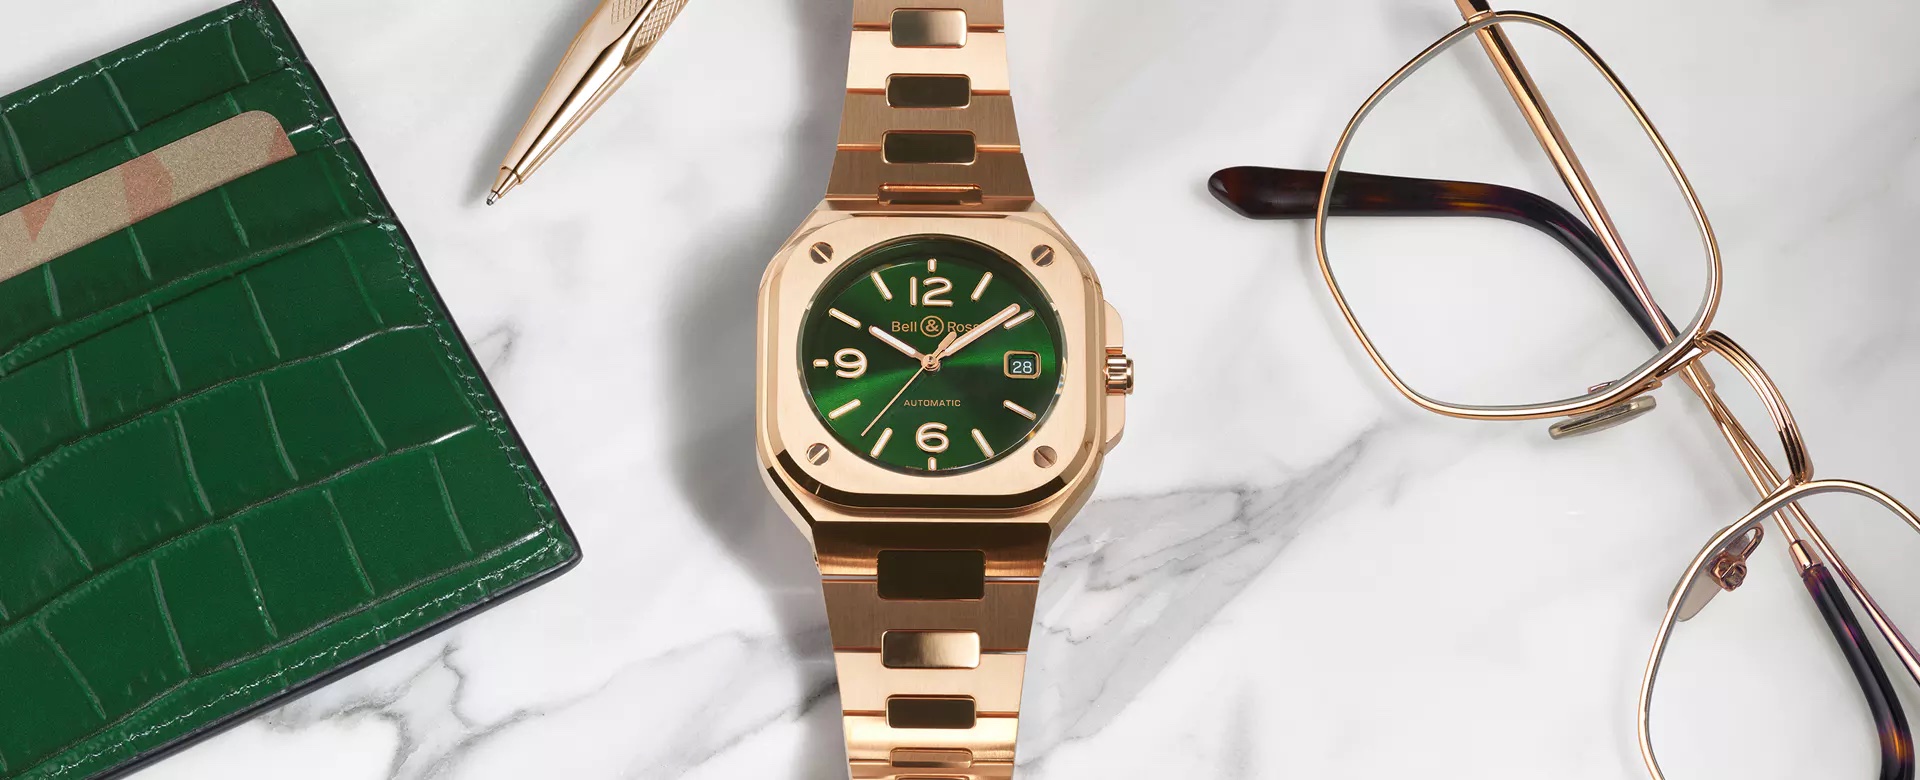 Bell & Ross BR 05 Green Gold BR05A-GN-PG:SPG Lifestyle